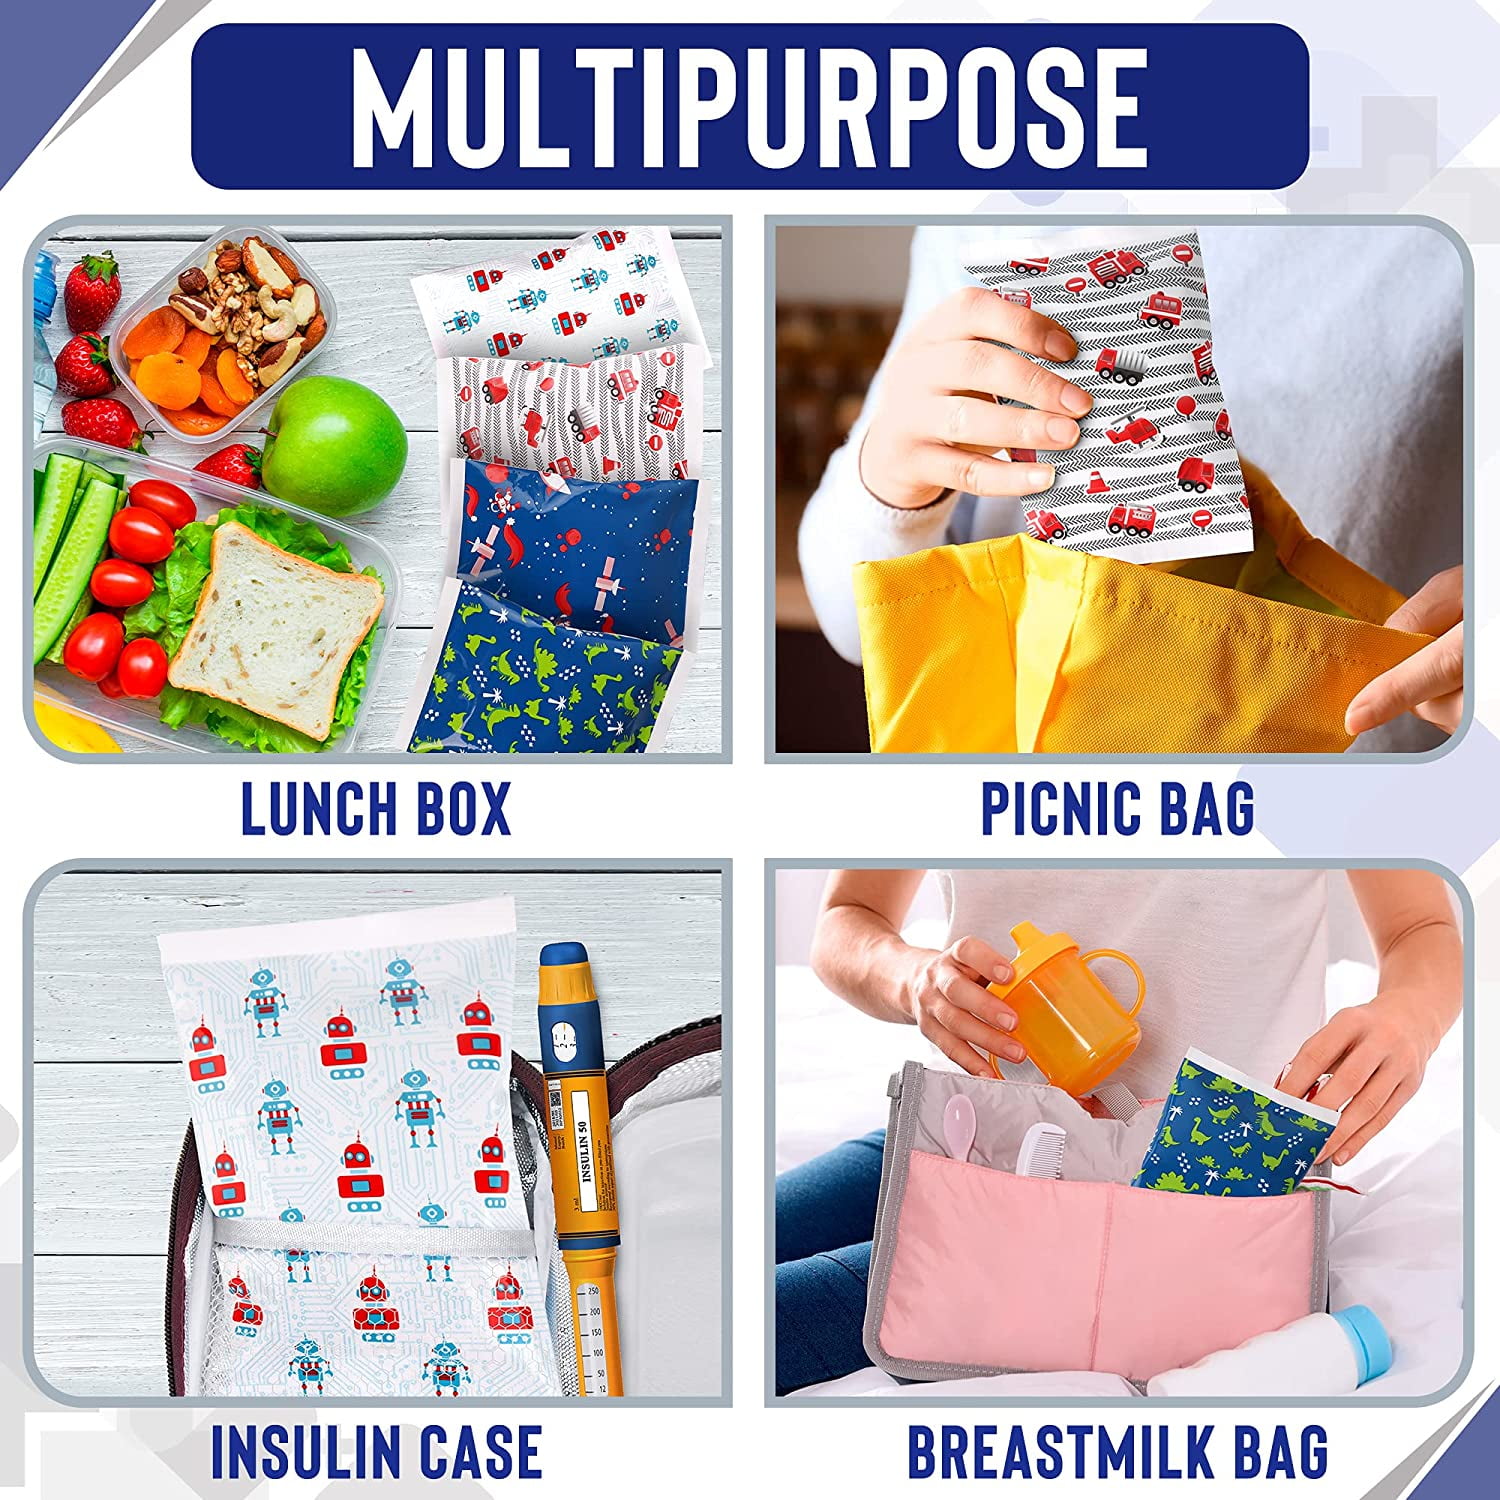 Shop lunchtime essentials up to 25% off: Lunch boxes, ice packs and more -  Good Morning America